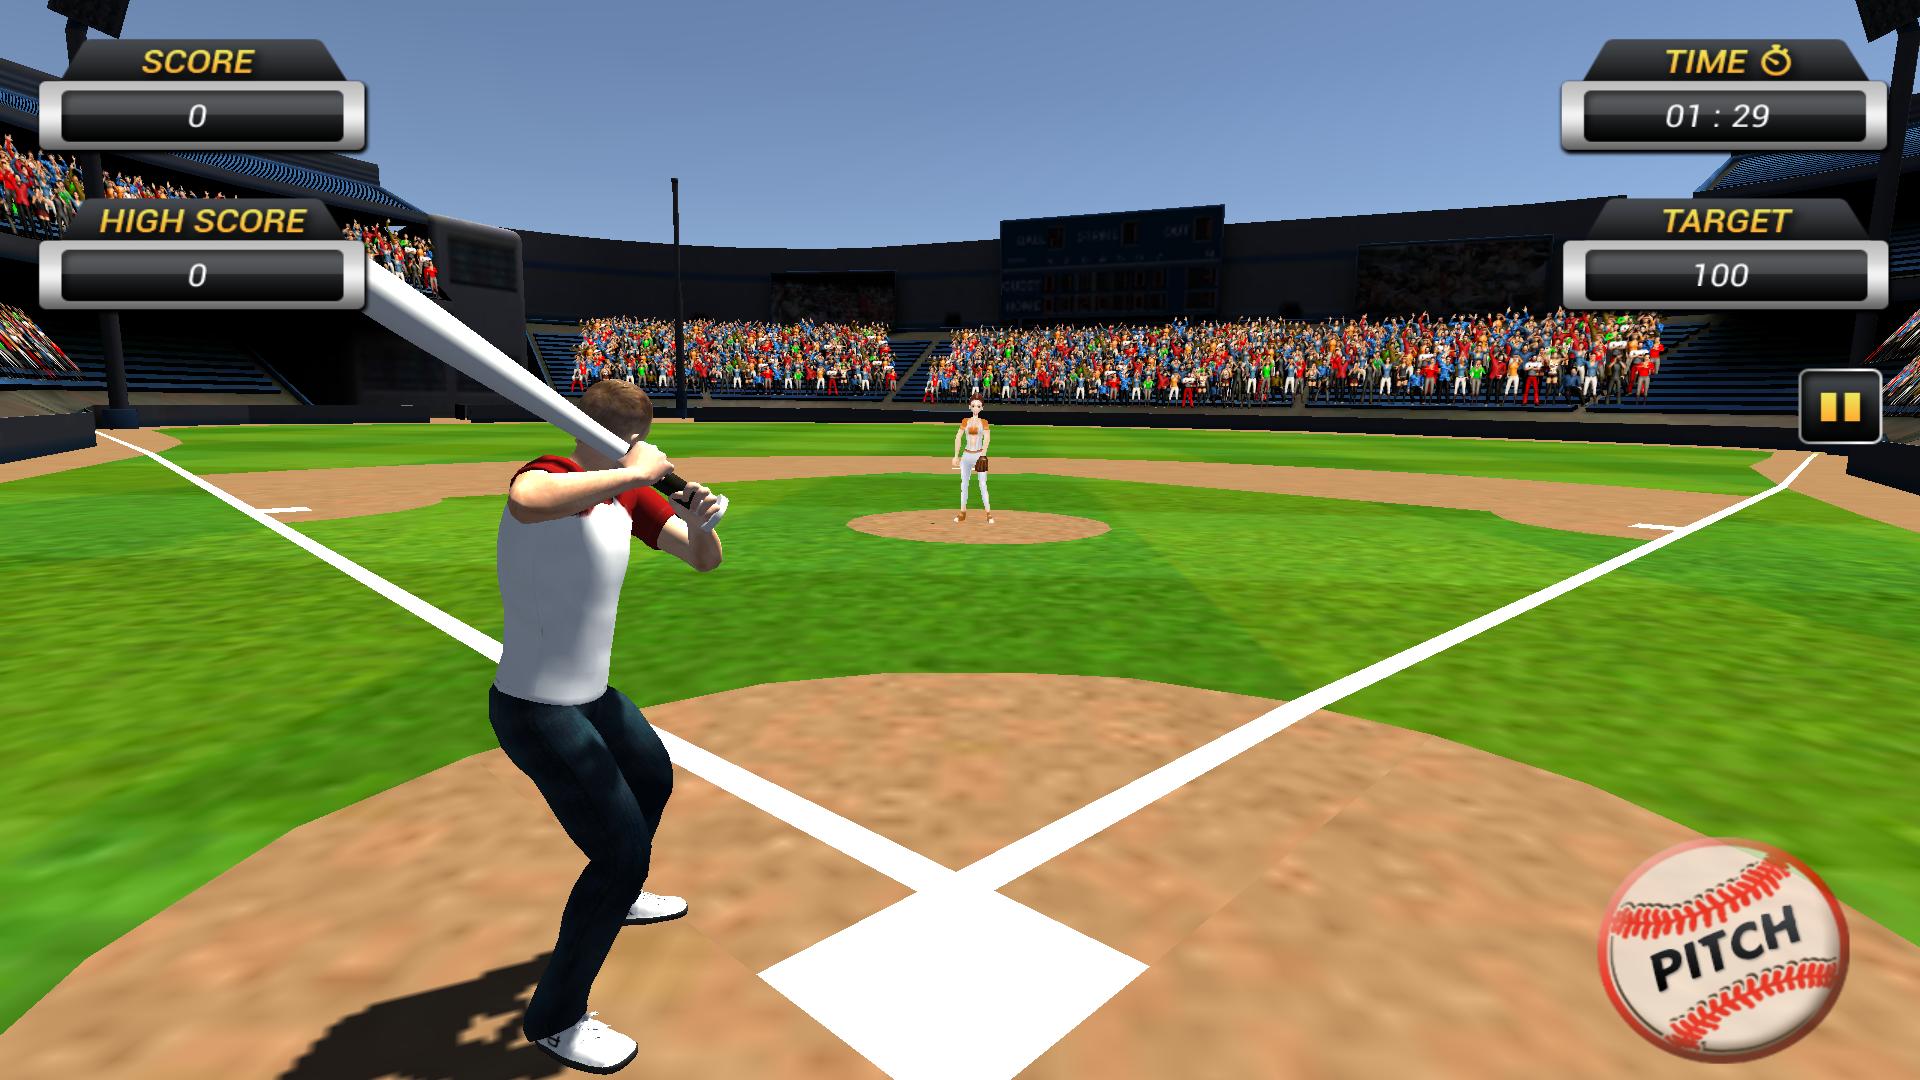 Baseball games for Android - APK Download